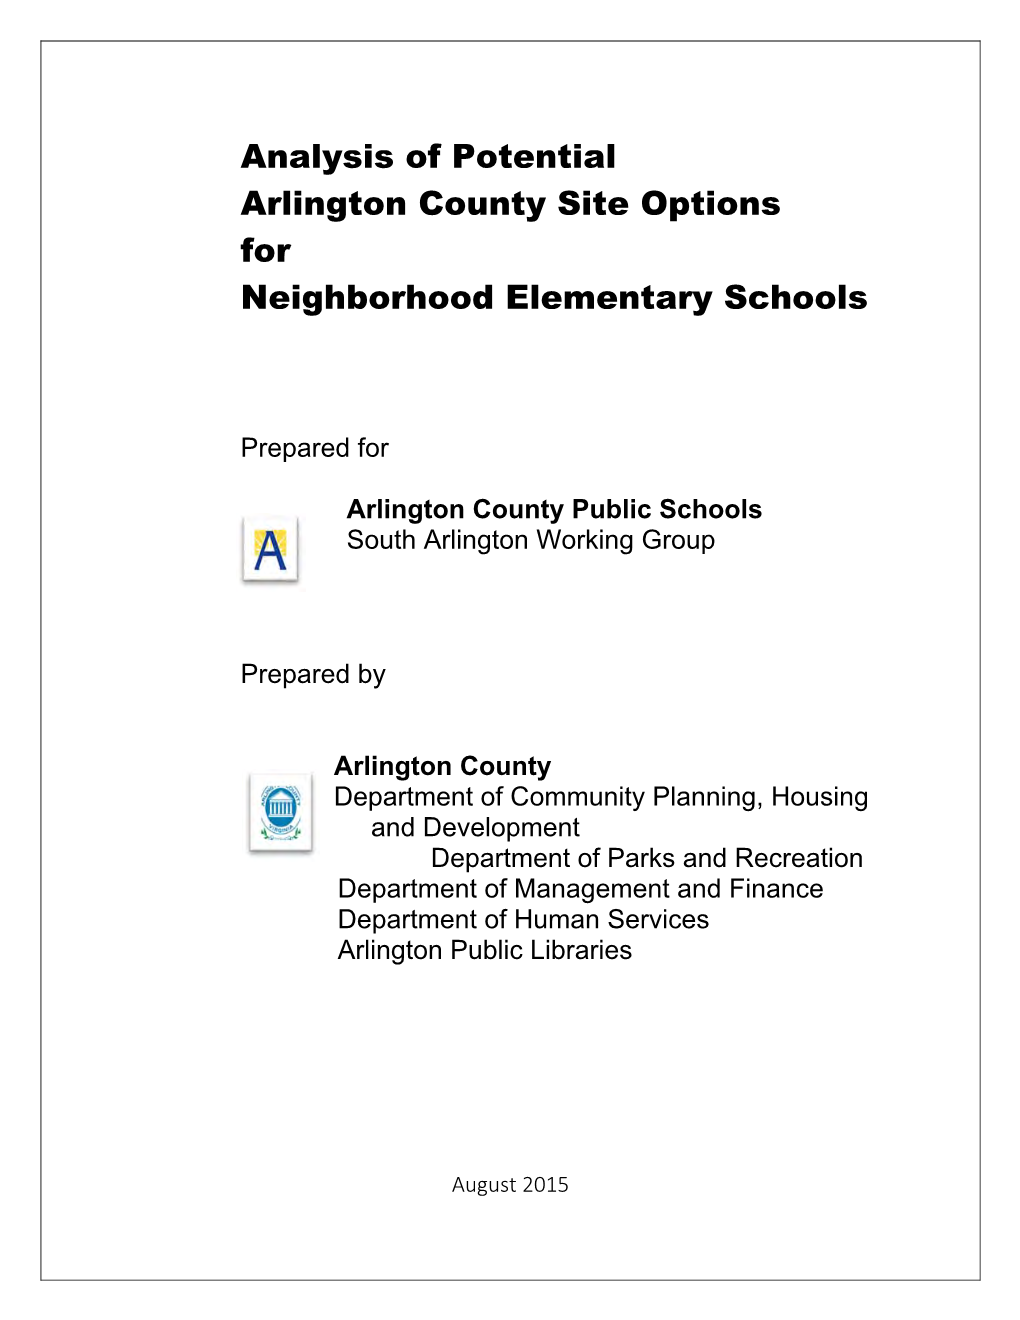 Analysis of Potential Arlington County Site Options for Neighborhood Elementary Schools